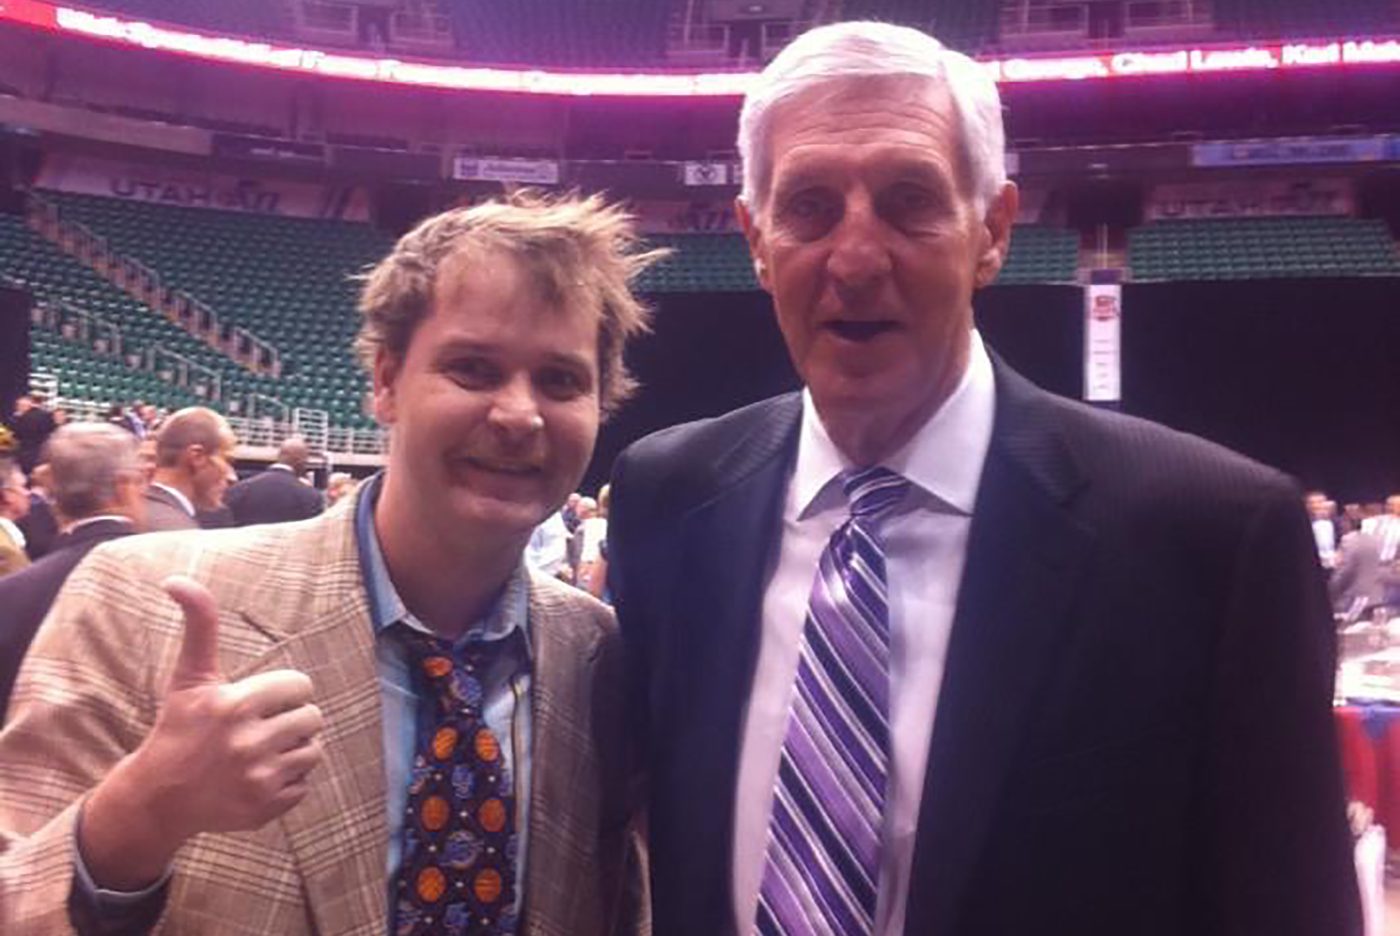 (L–R) Mike Brown and Coach Jerry Sloan. Rest easy, Coach.